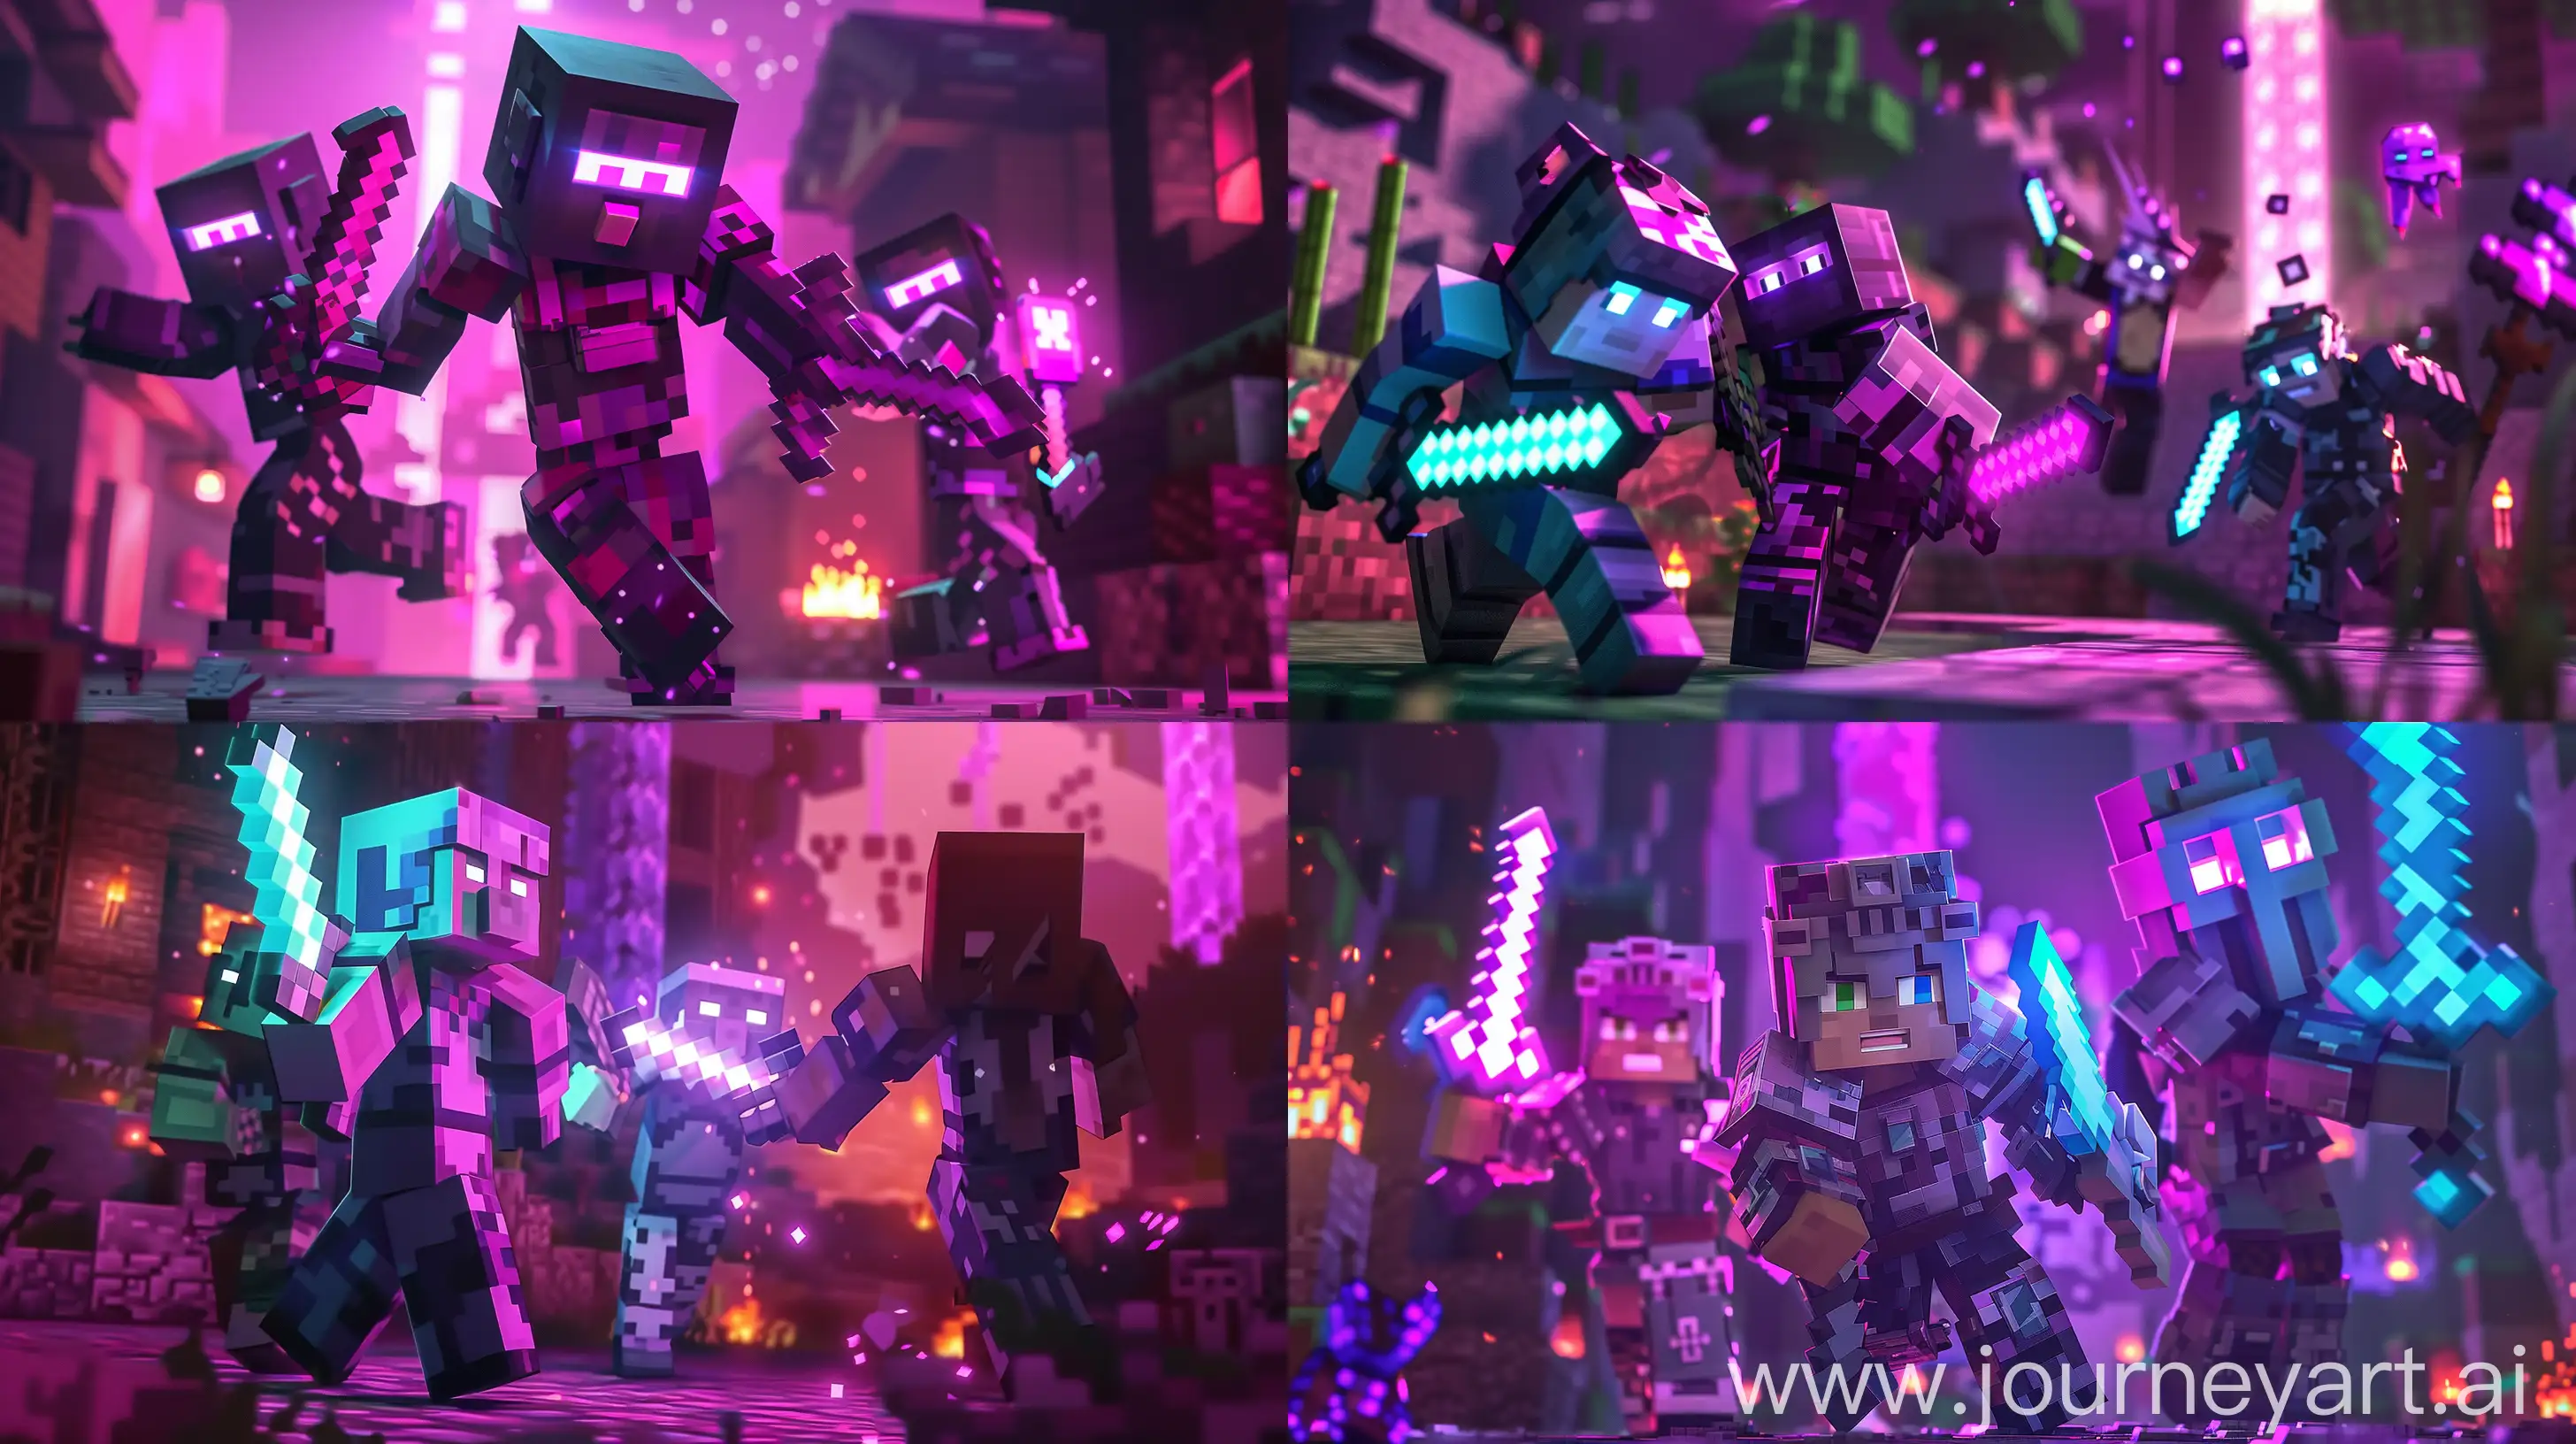 Dynamic-Minecraft-Characters-in-Colorful-Armor-Exploring-a-Fantastical-World